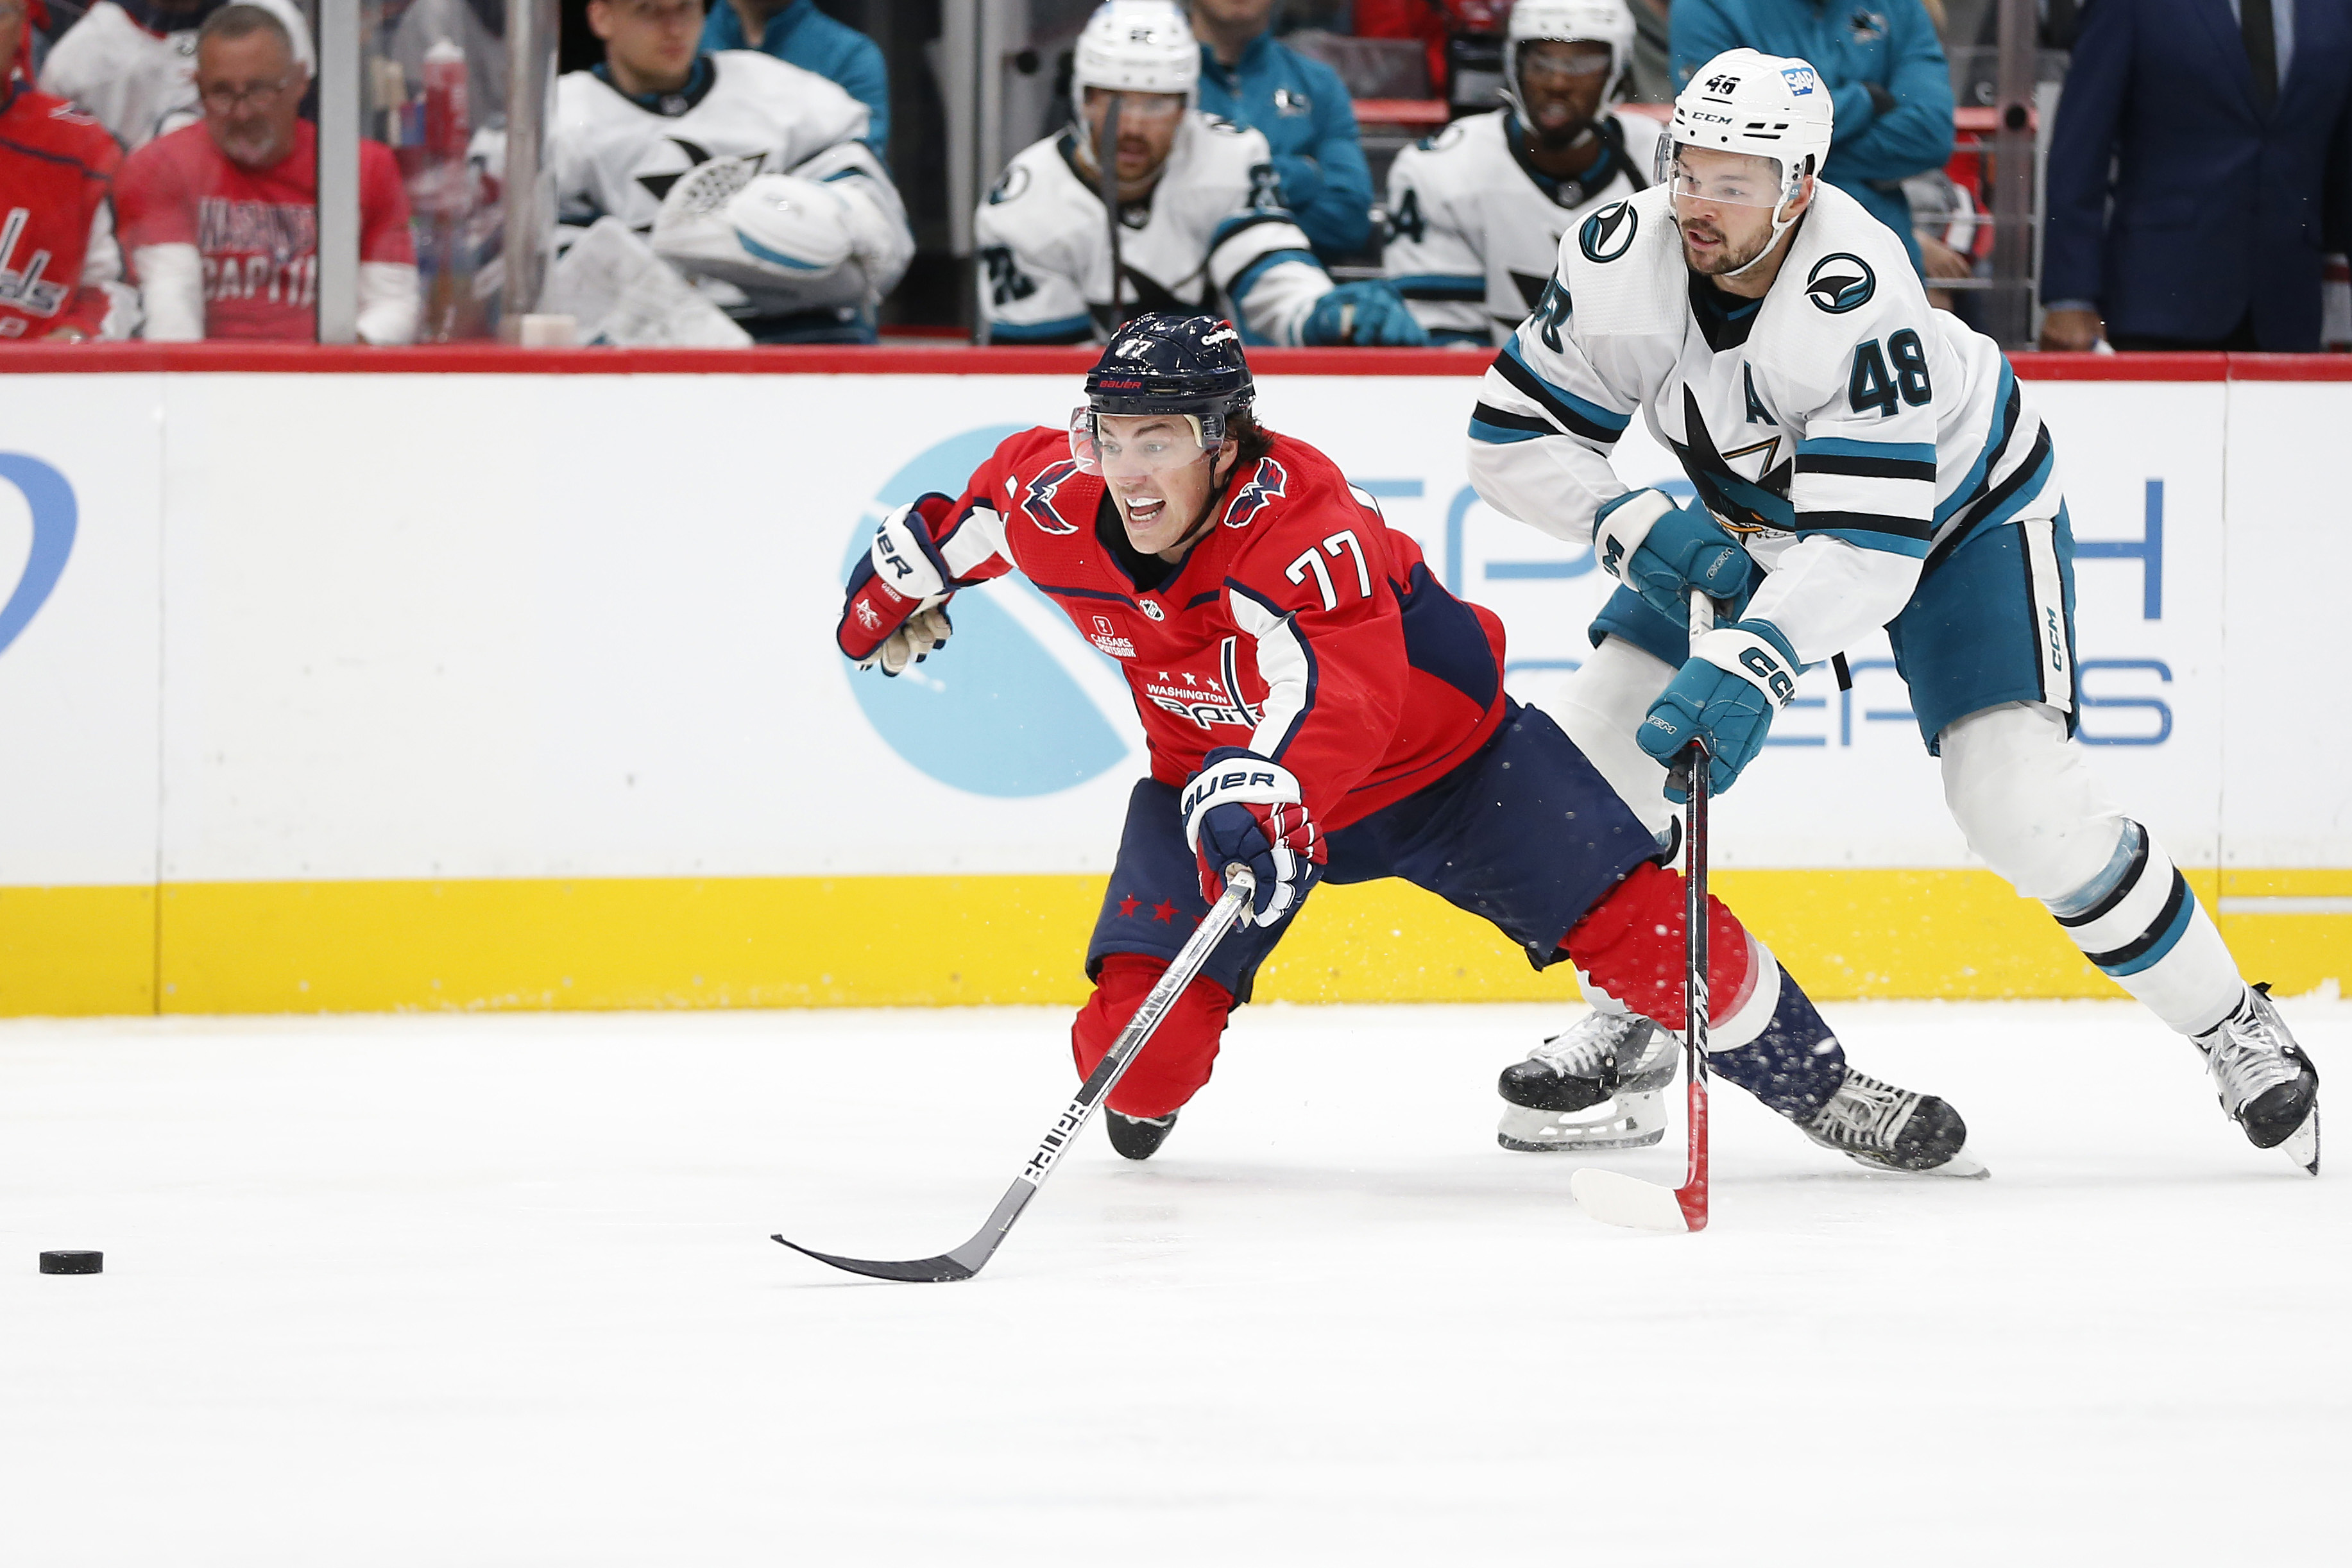 Capitals Rumors: 2 Potential Landing Spots for T.J. Oshie - NHL Trade ...